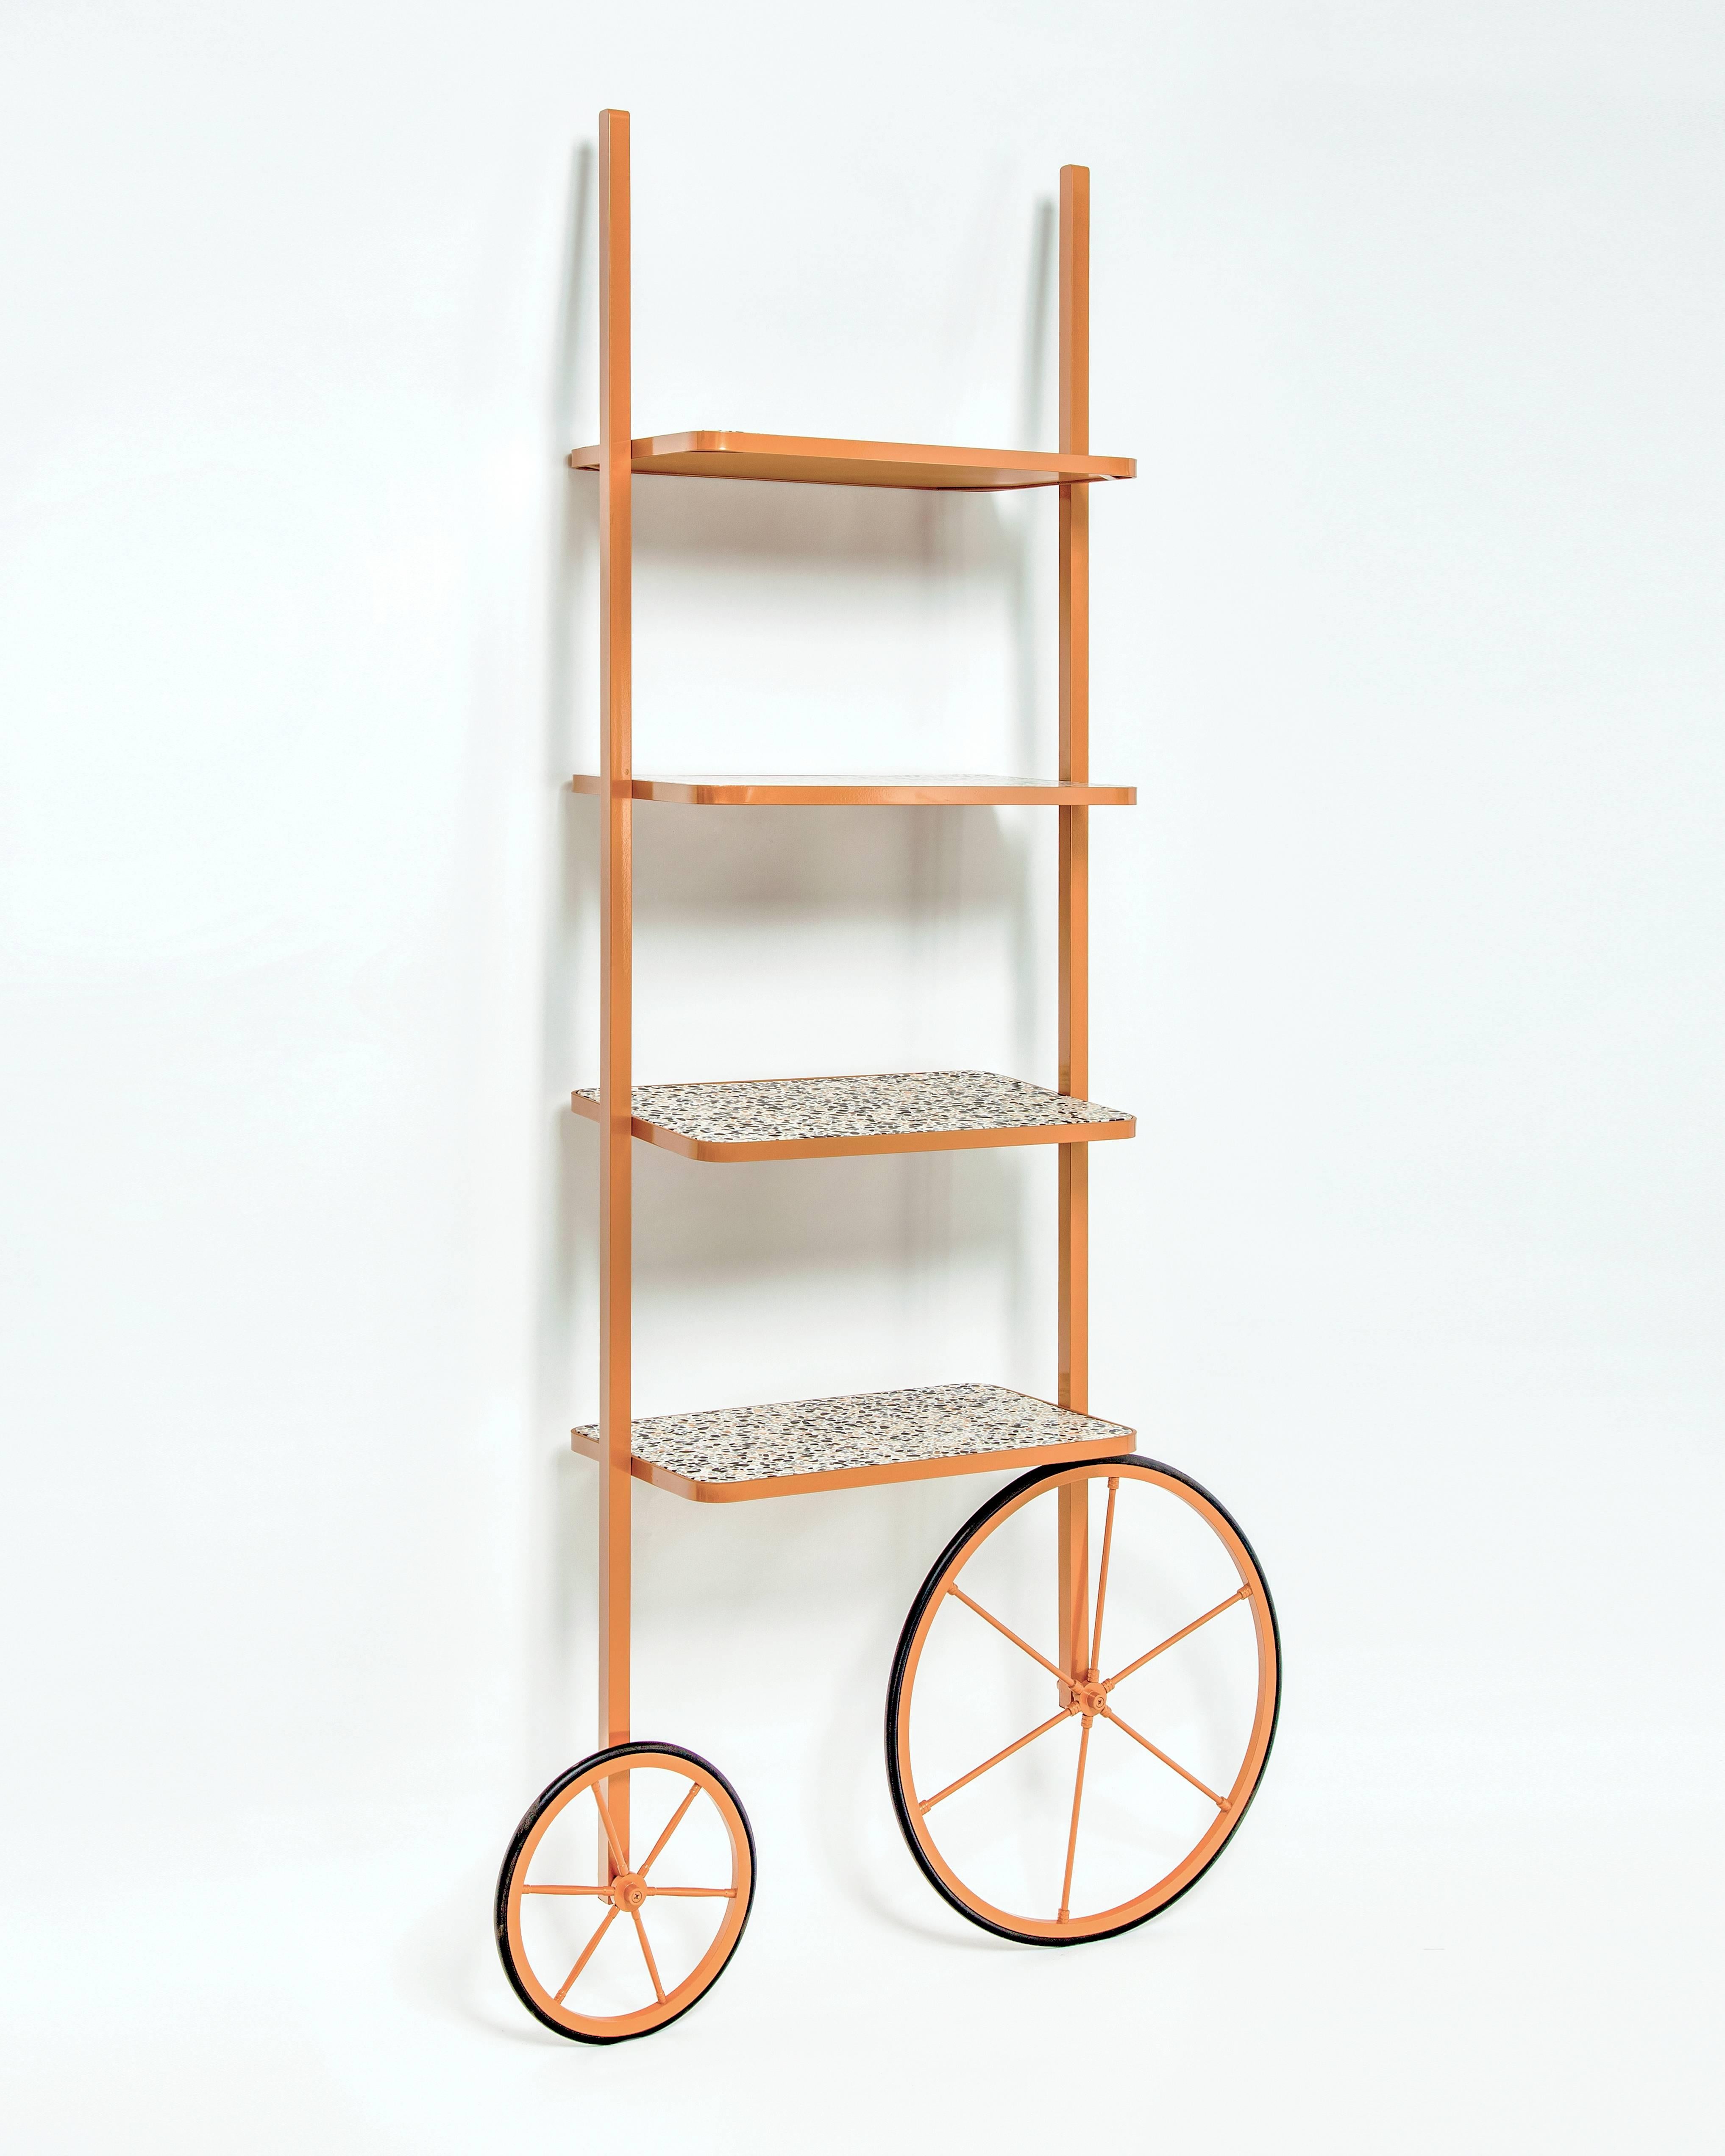 The design for Cyclopedia stems from the high wheel bicycles of the 1870s. Unlike most bookshelves, Cyclopedia differentiates itself through its portable structure. This unique piece is a library and a display shelf that can be wheeled and